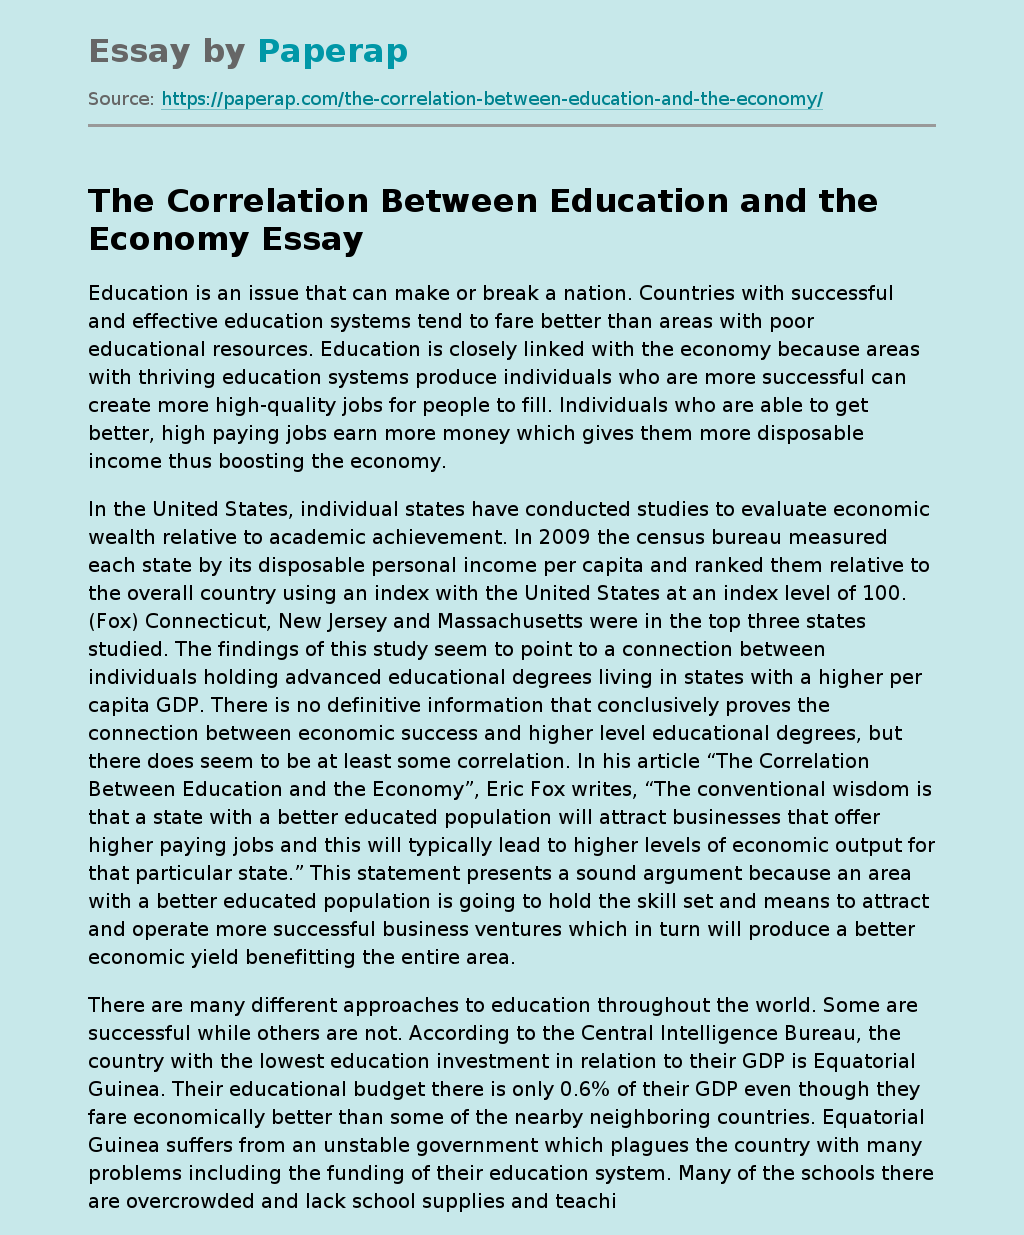 The Correlation Between Education and the Economy